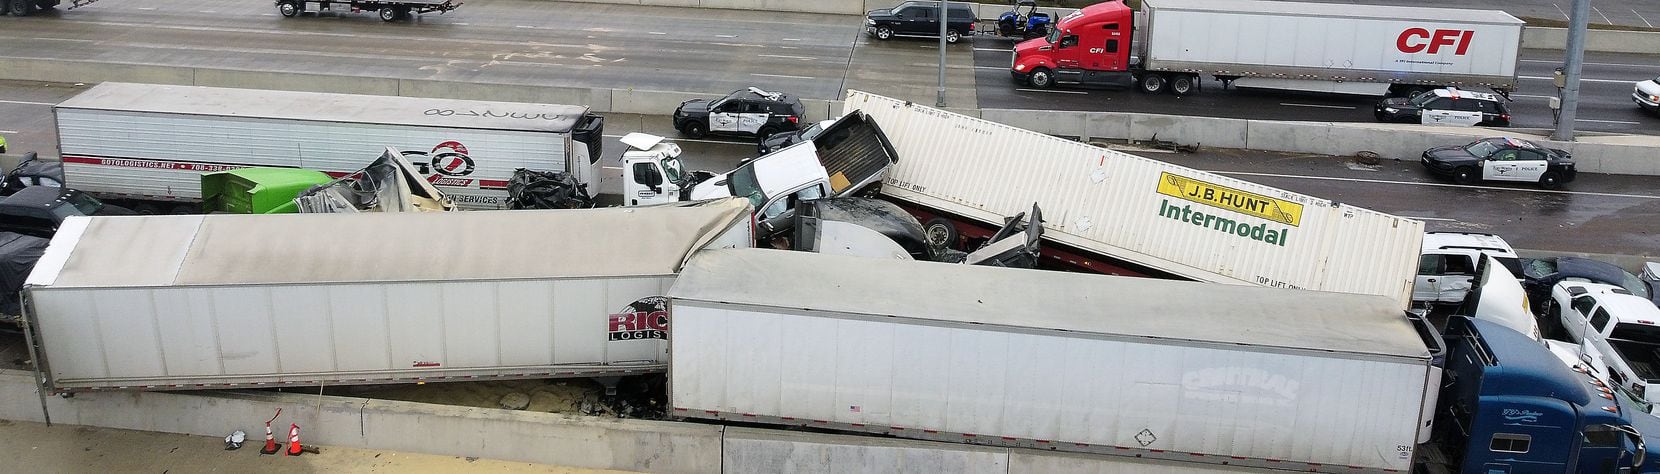 Mass casualty wreck on I-35W and Northside Drive in Fort Worth, Texas on Thursday, February 11, 2021. (Lawrence Jenkins/Special Contributor)